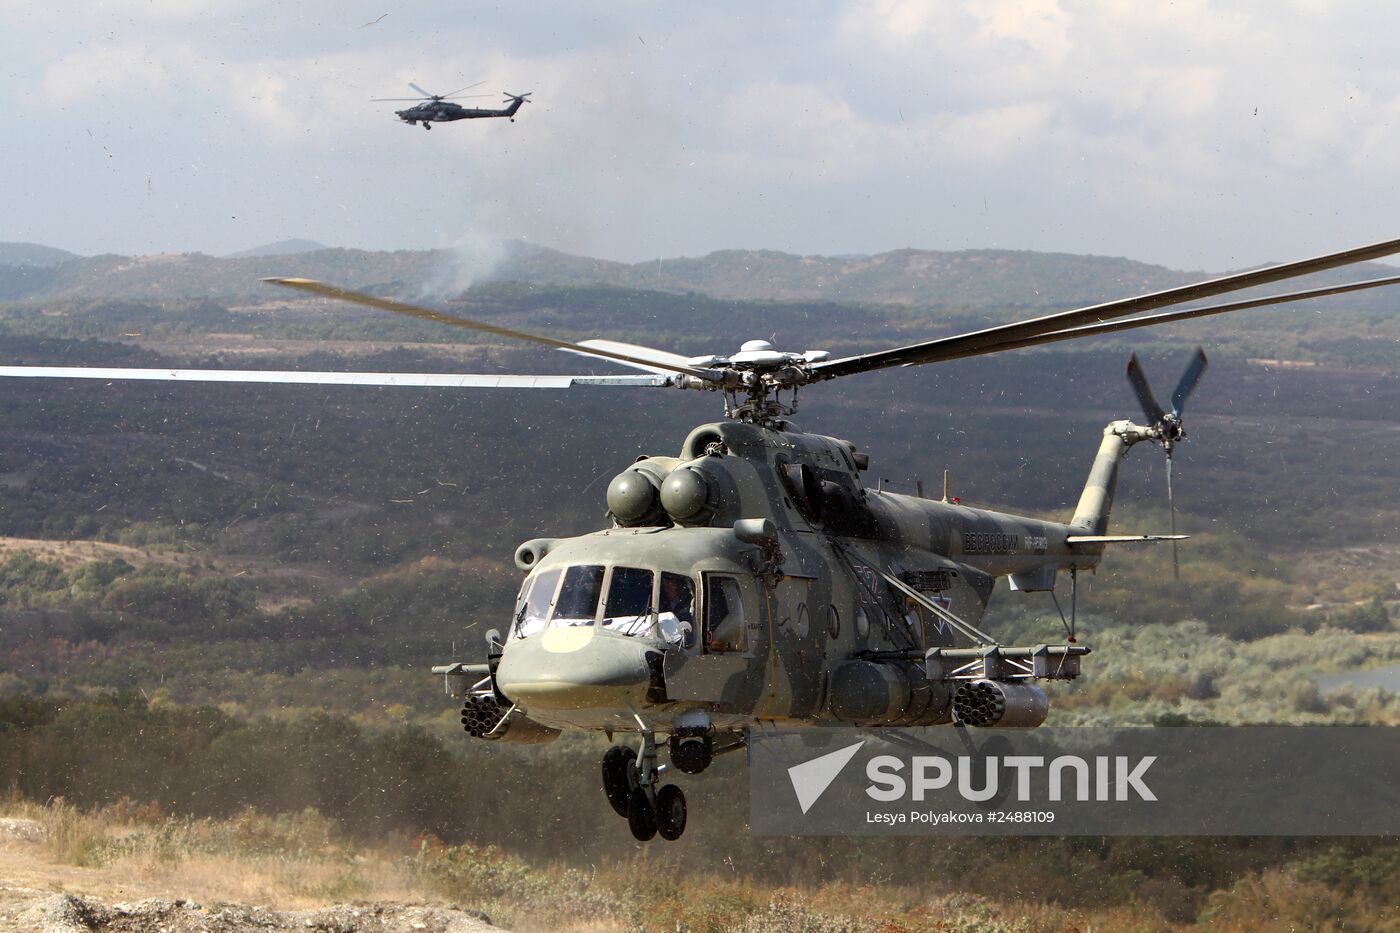 A joint Russian-Belarusian tactical exercise in the Krasnodar Territory